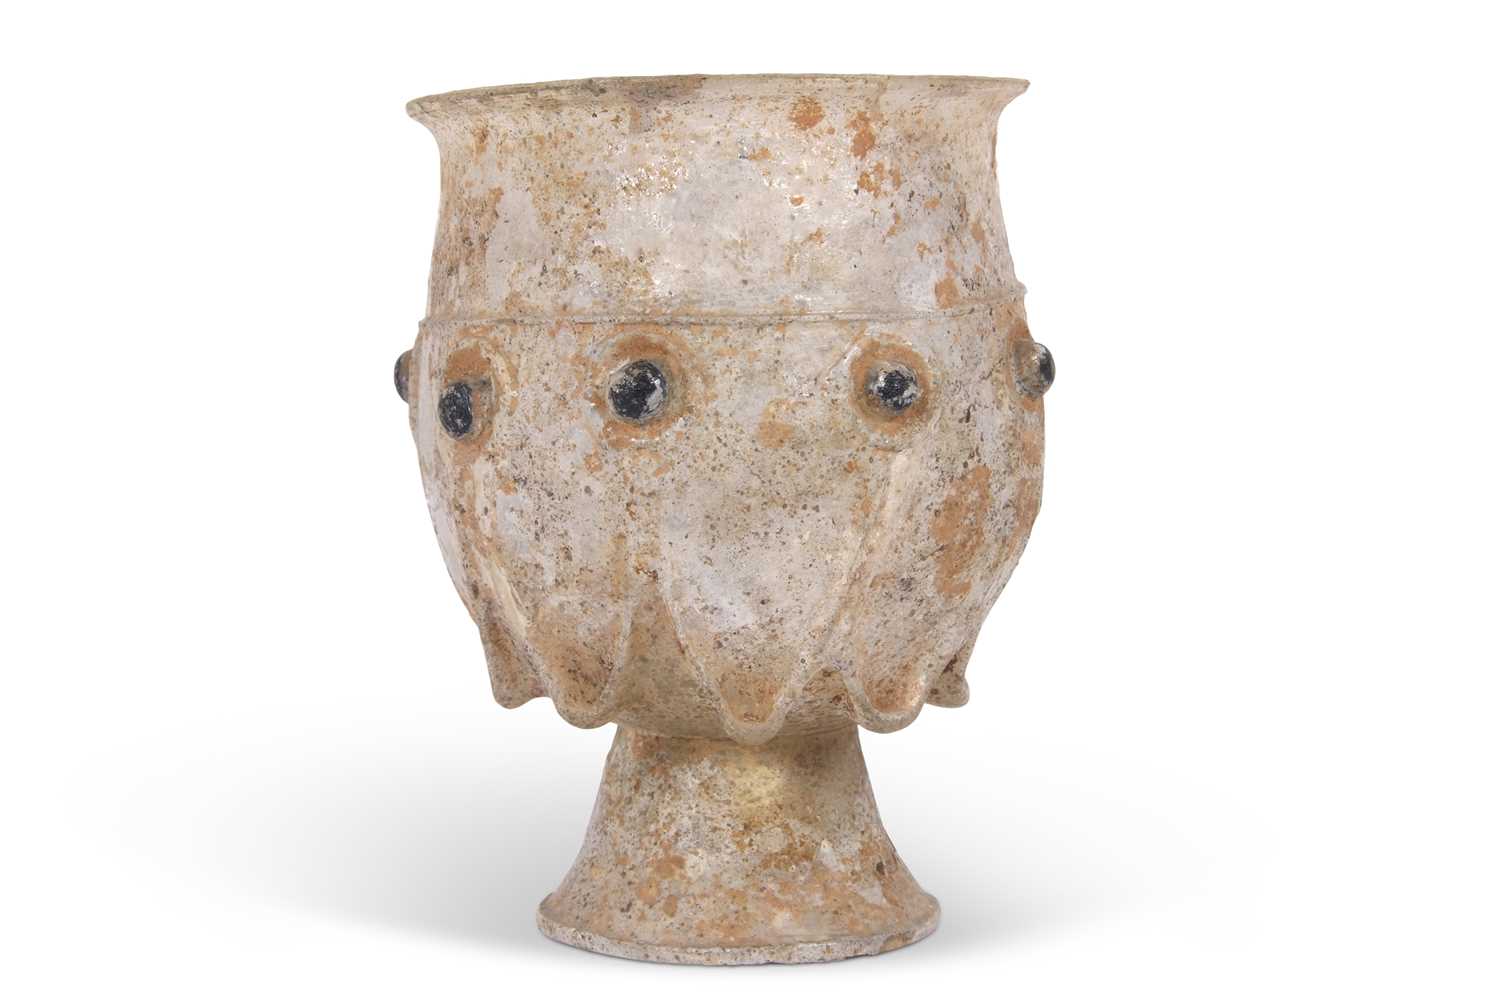 Middle Eastern glass beaker, 2-3rd Century AD, probably Roman/Sasanian with swag and beaded